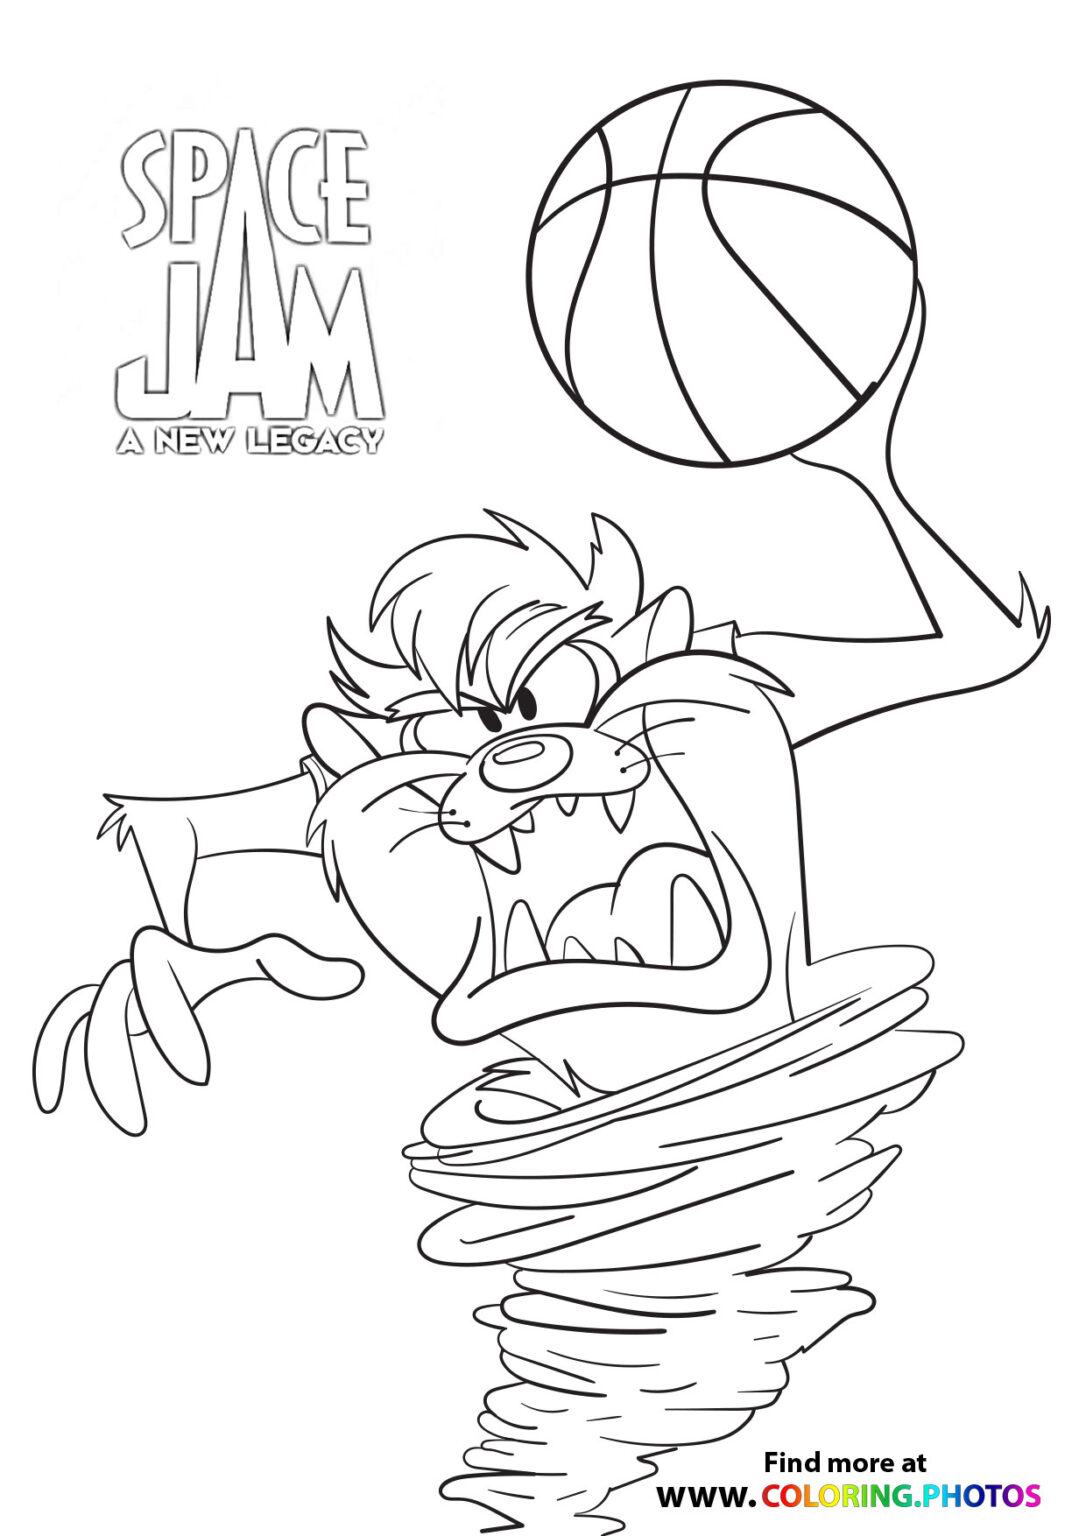 Space Jam Coloring Pages Printable - Printable Templates